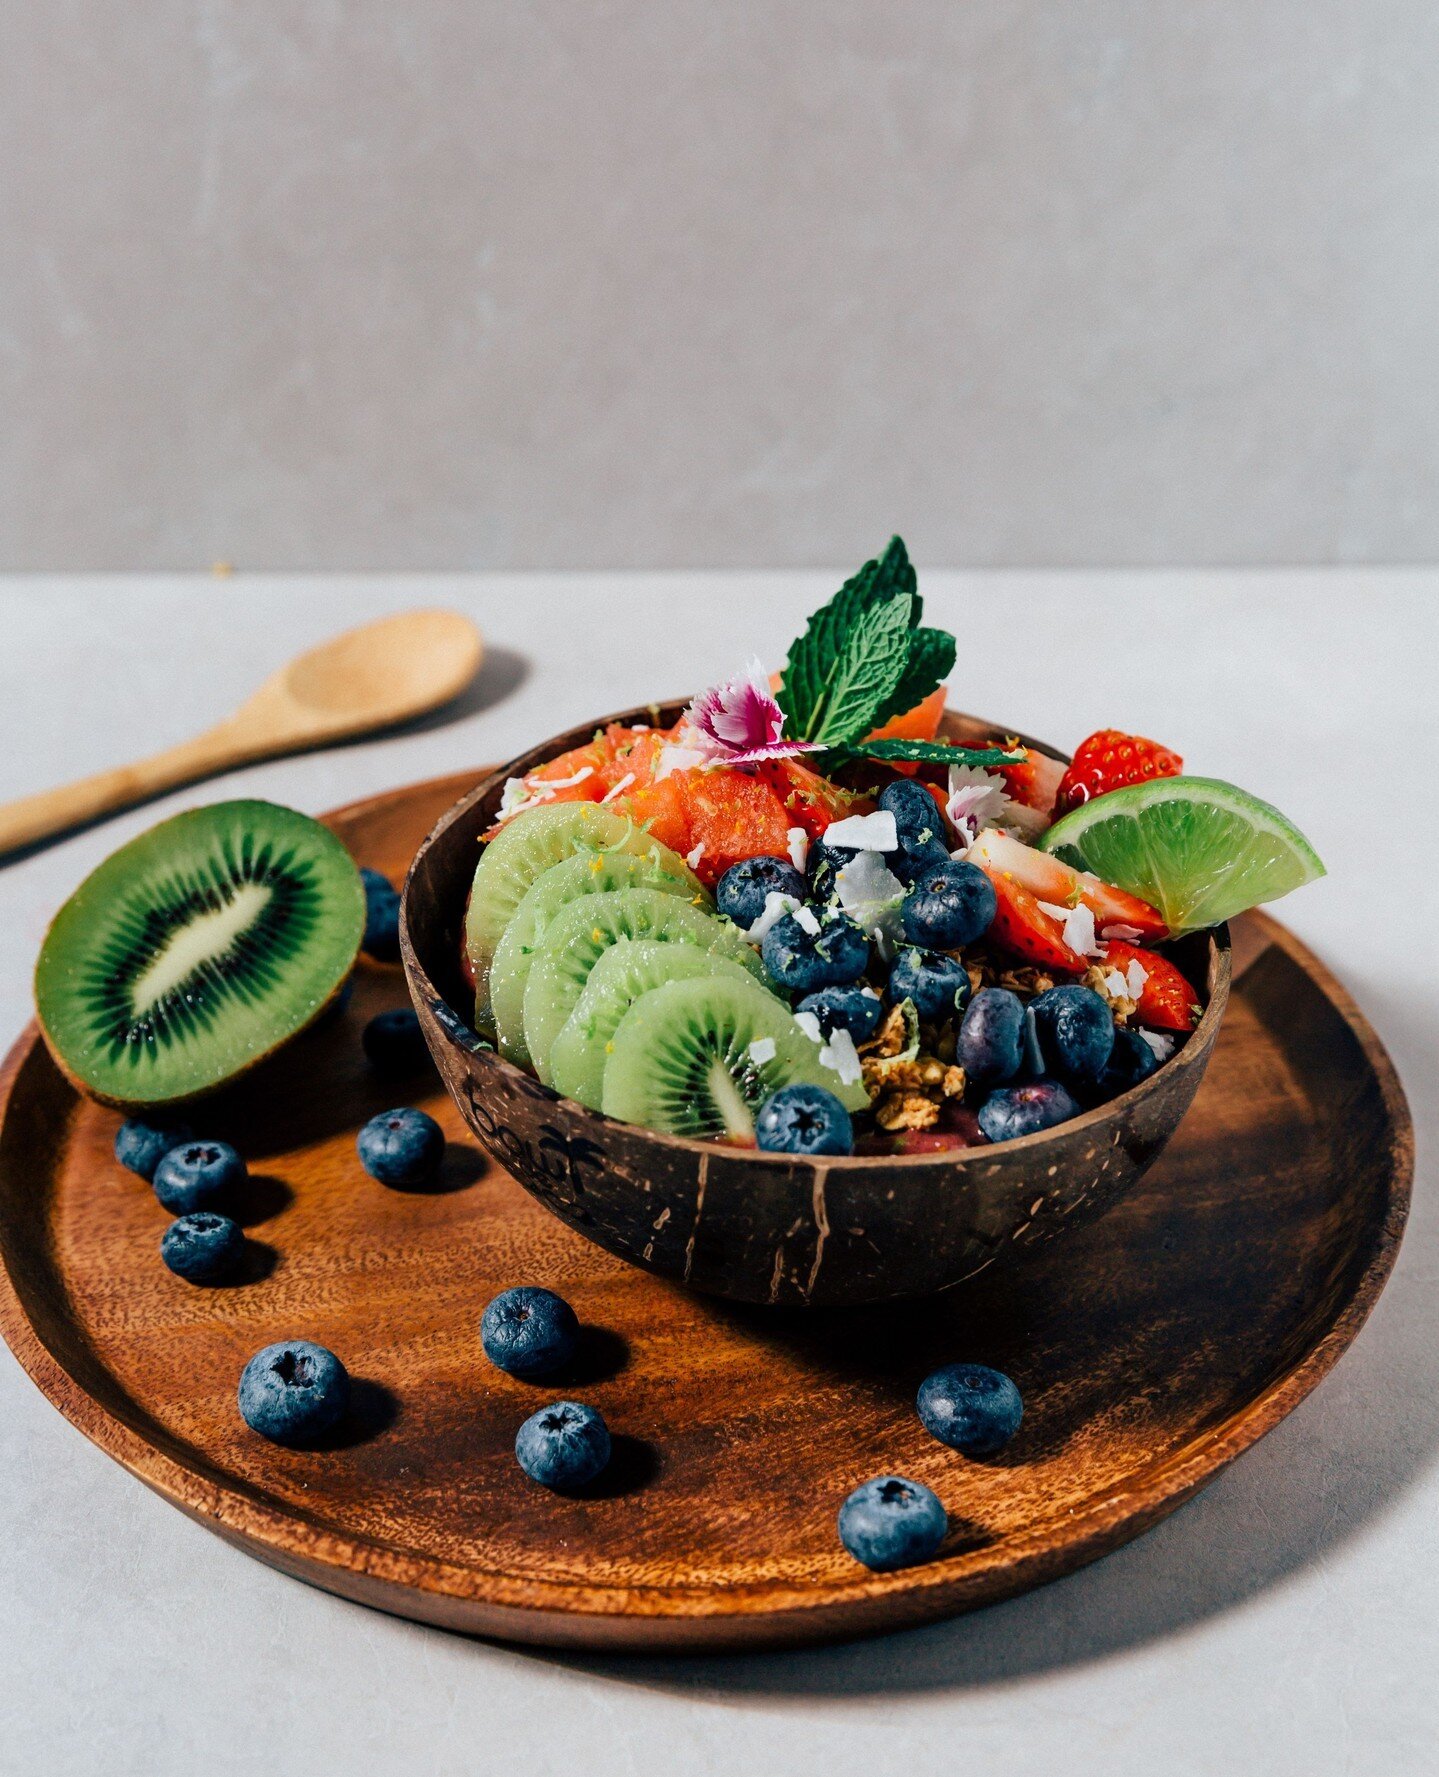 Summer is here and it is no shock that A&ccedil;ai bowl cravings are through the roof 🤗 Find my E-book in my Link in Bio to read the BEST a&ccedil;ai bowl recipes straight from the Kiss the Berry Menu! 🍓